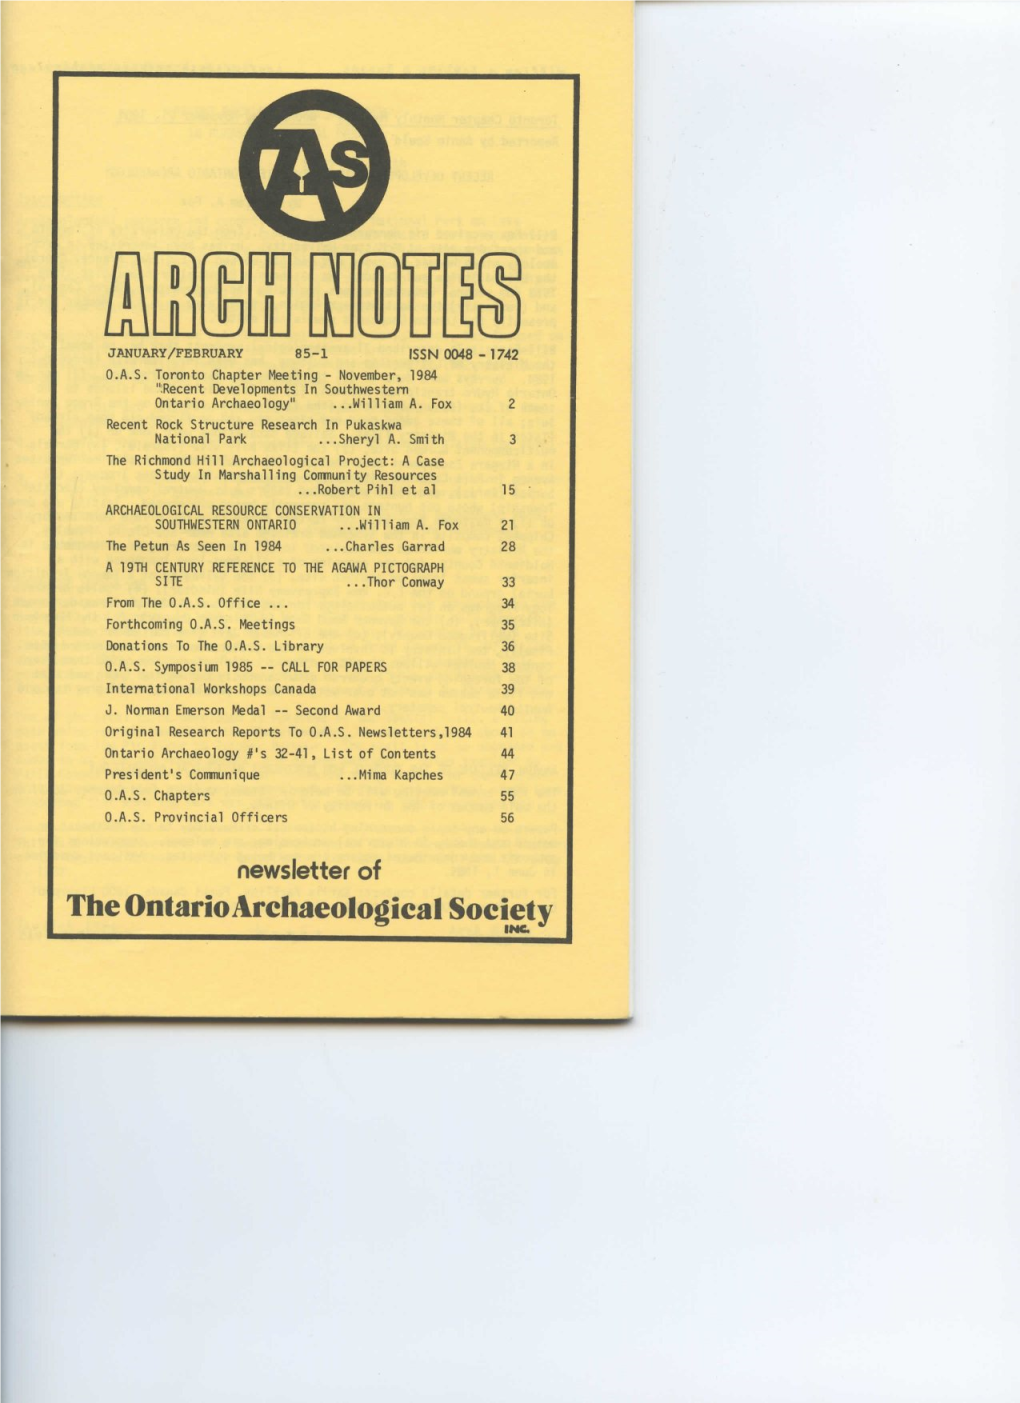 Newsletter of the Ontario Archaeological Society INC Uij.Tlla.Rn a Dox